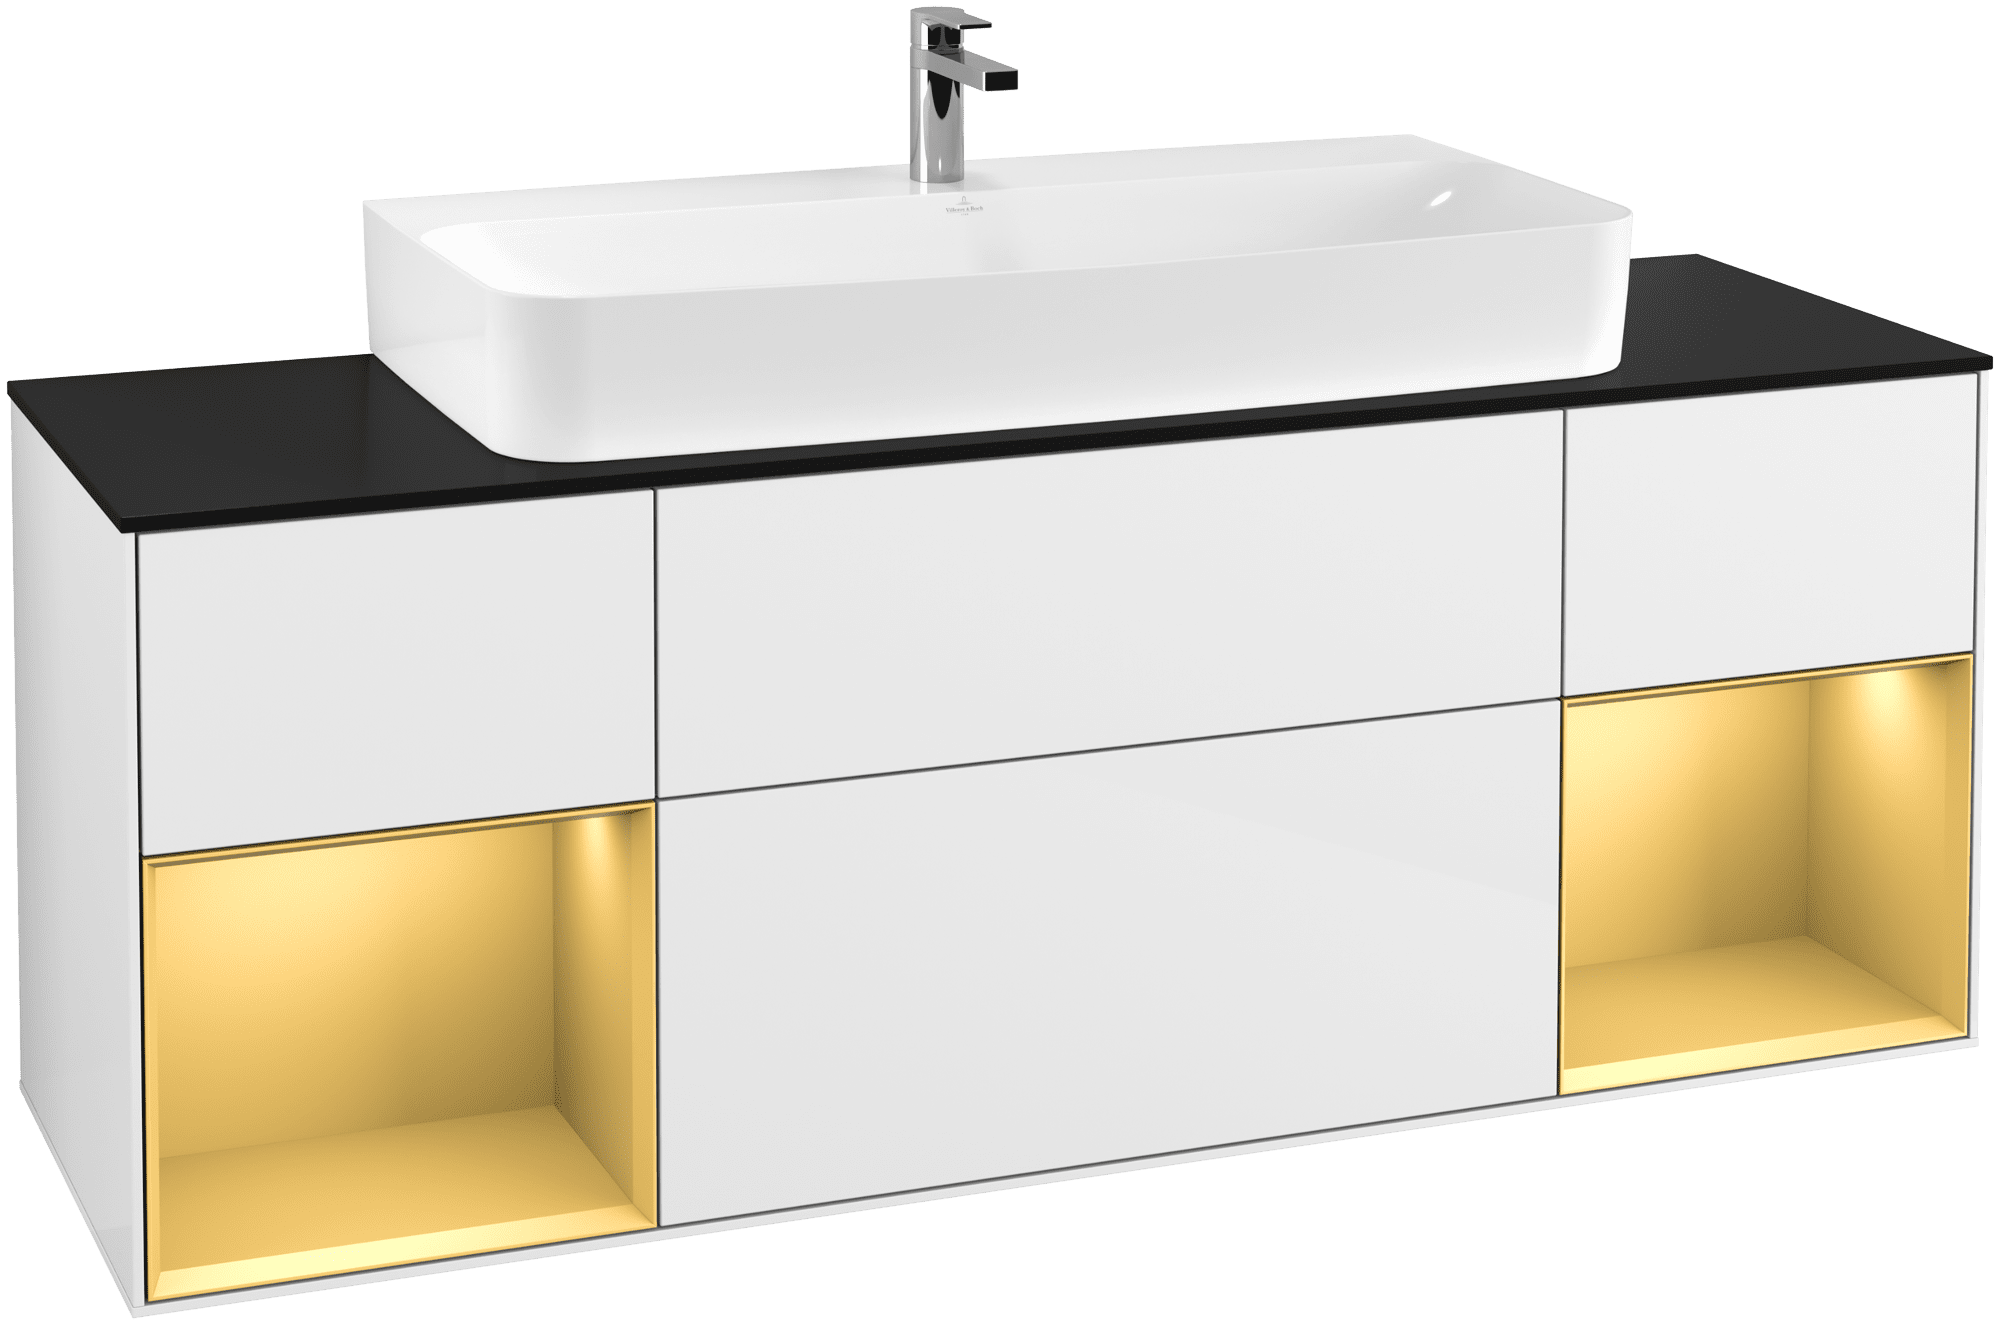 Picture of VILLEROY BOCH Finion Vanity unit, with lighting, 4 pull-out compartments, 1600 x 603 x 501 mm, Glossy White Lacquer / Gold Matt Lacquer / Glass Black Matt #G212HFGF